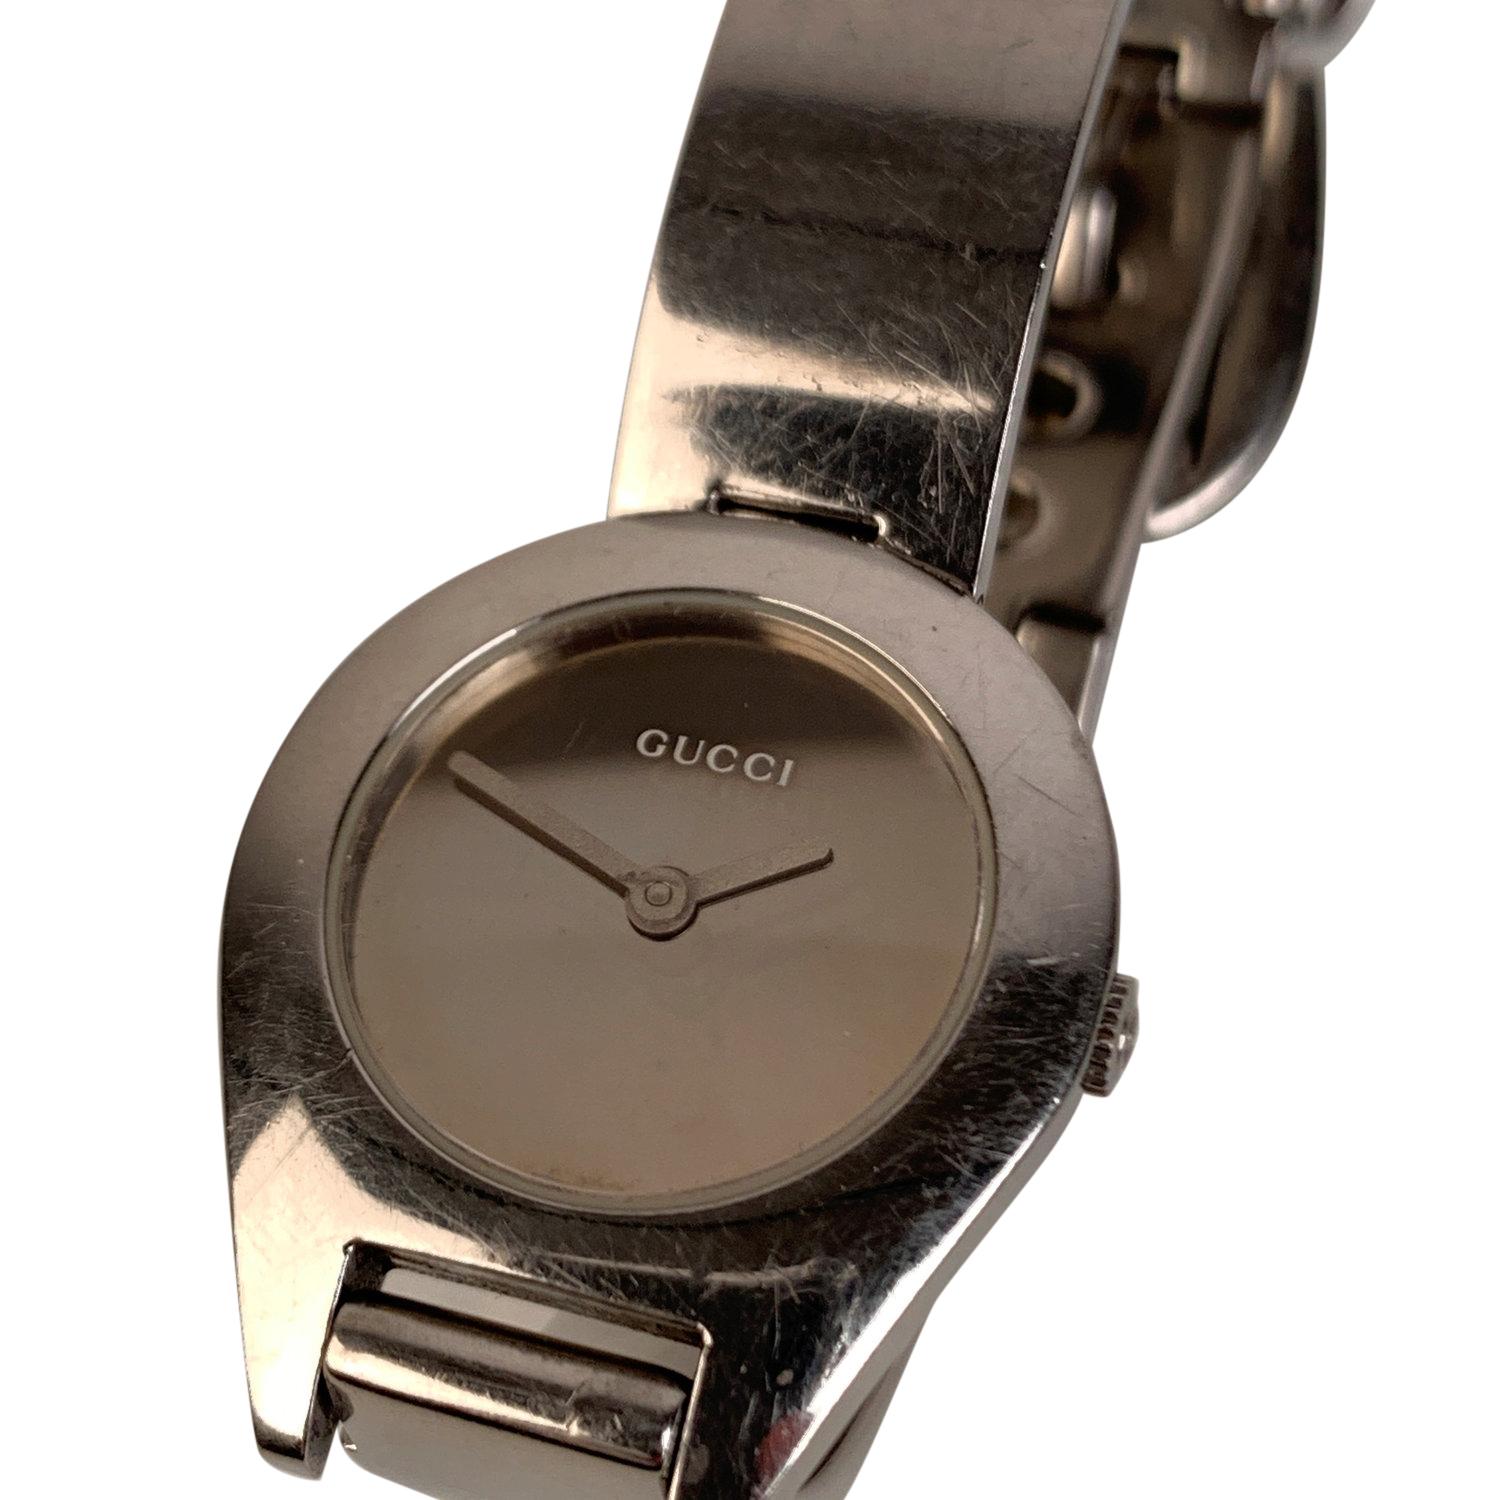 - Gucci Stainless Steel Wrist Watch Bracelet 
- Beautiful Wristwatch by GUCCI, mod. 6700L
- Black dial
- Gucci baton hour, minute & second hands, 
-  Quartz powered movement
- Gucci SS case, measures 26 mm with crown and 30 mm. lug to lug.
-  Belt